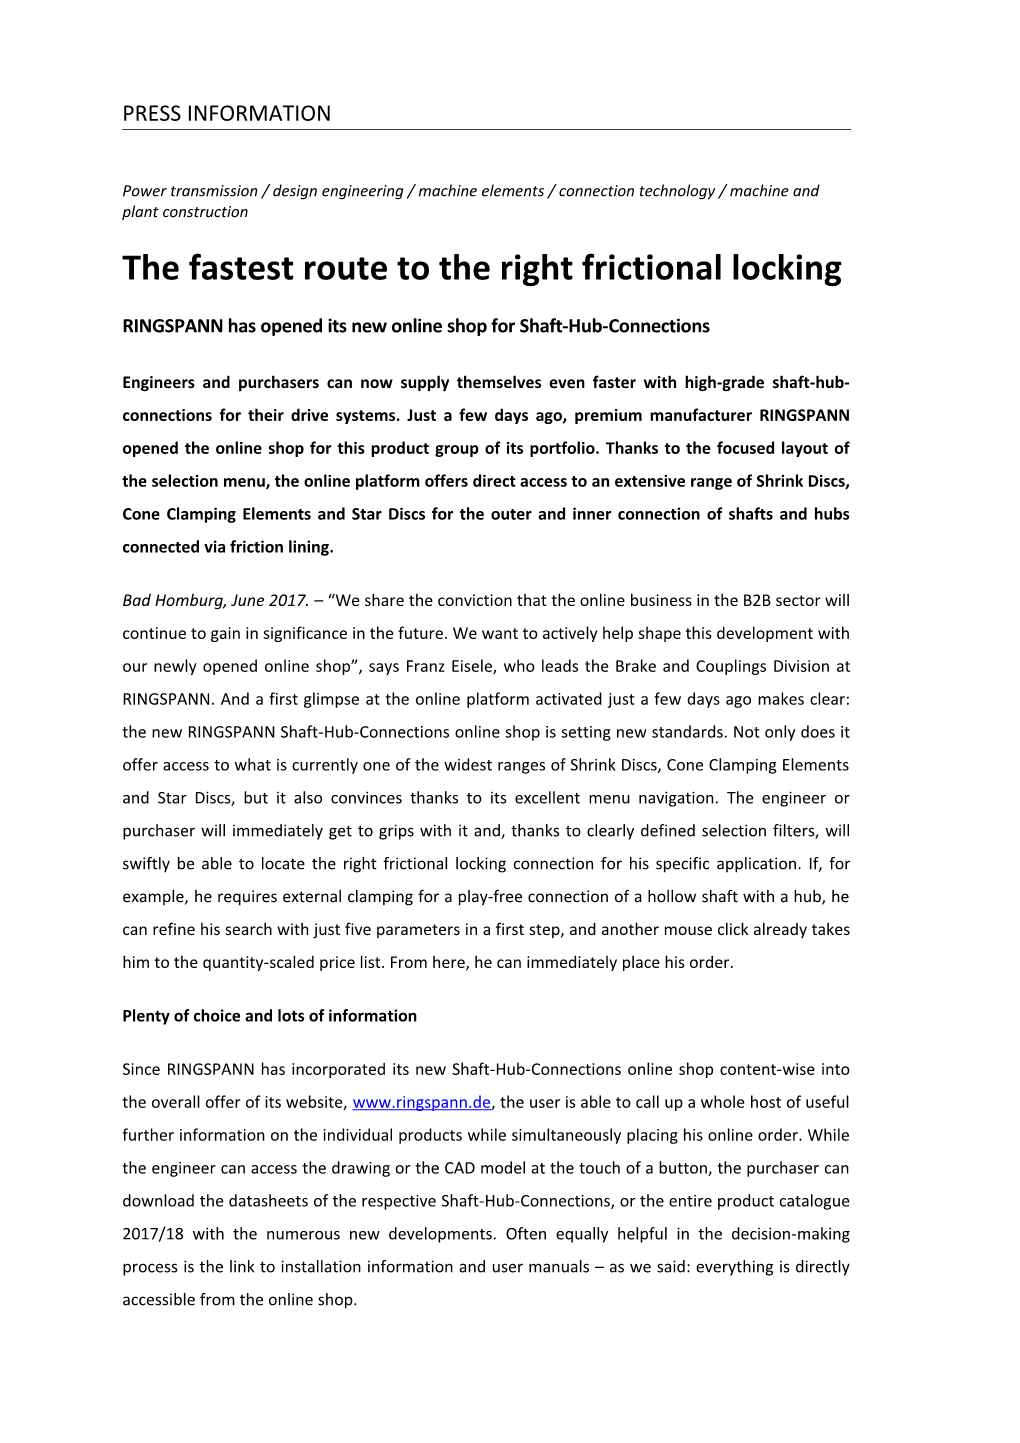 The Fastest Route to the Right Frictional Locking